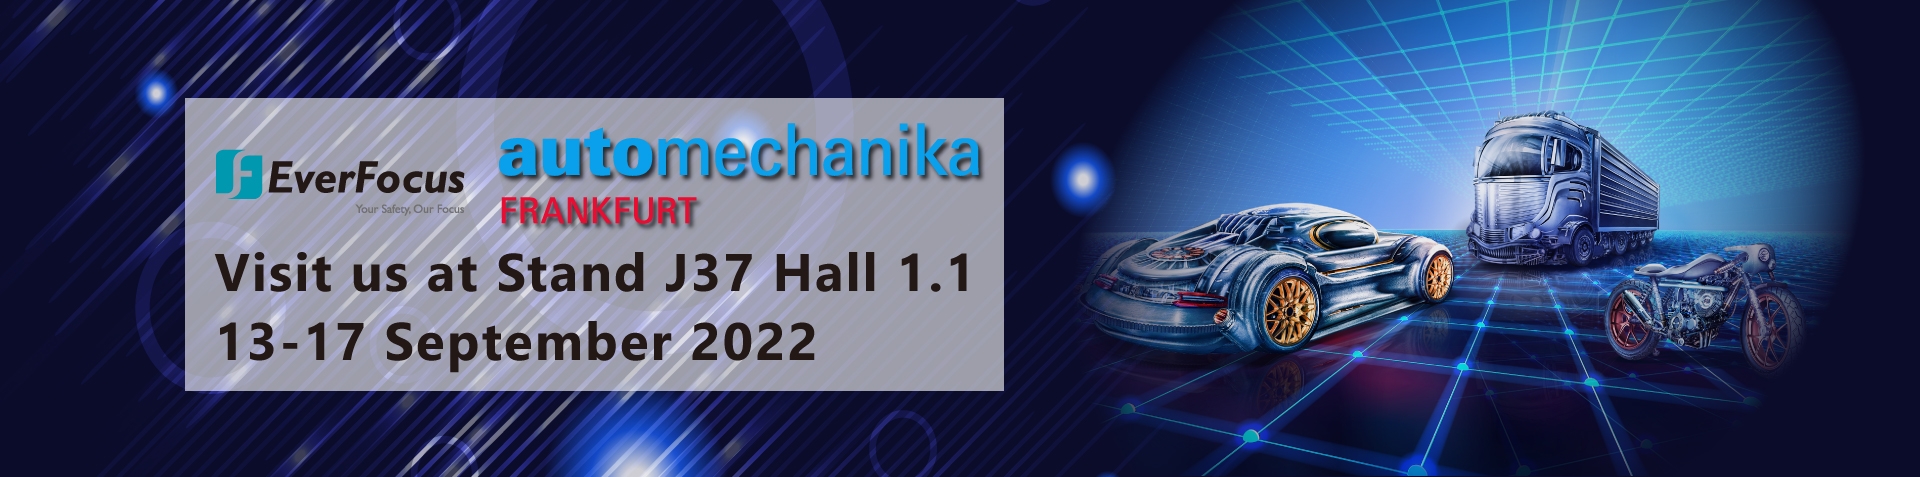 EverFocus will attend Automechanika Frankfurt 2022 in Germany as an Exhibitor on 13-17 September at the booth: J37 at Messe Frankfurt, Germany